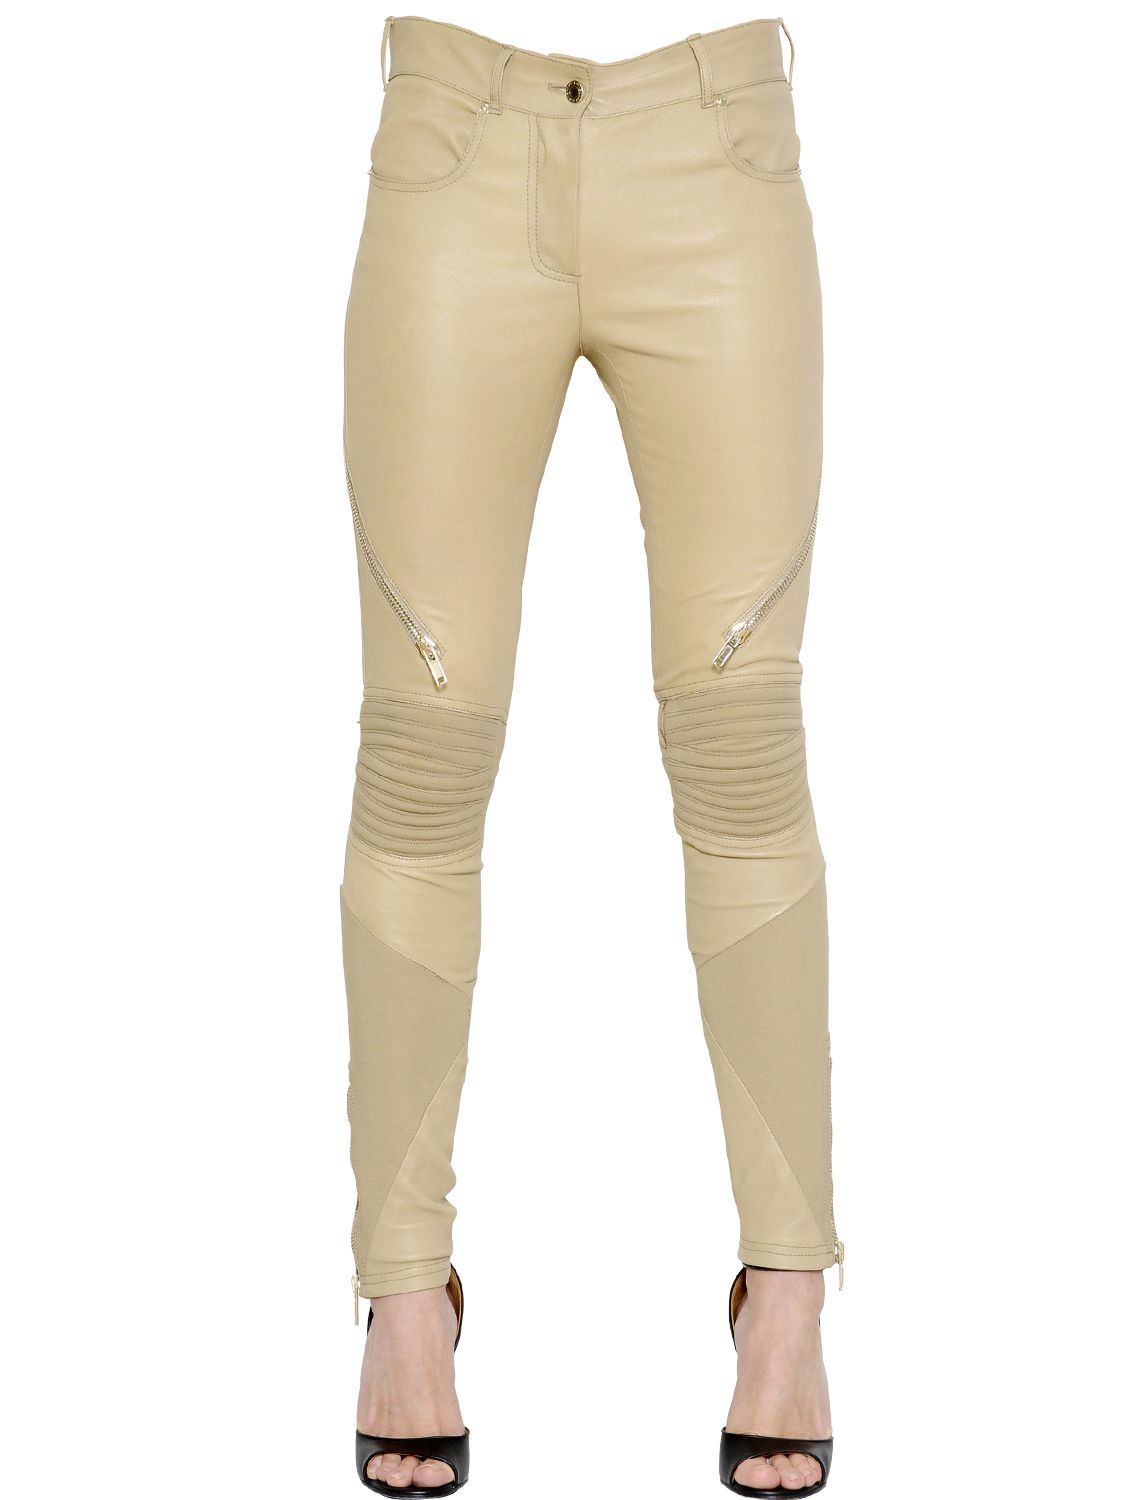 Lyst - Givenchy Stretch Nappa Leather Biker Pants in Natural